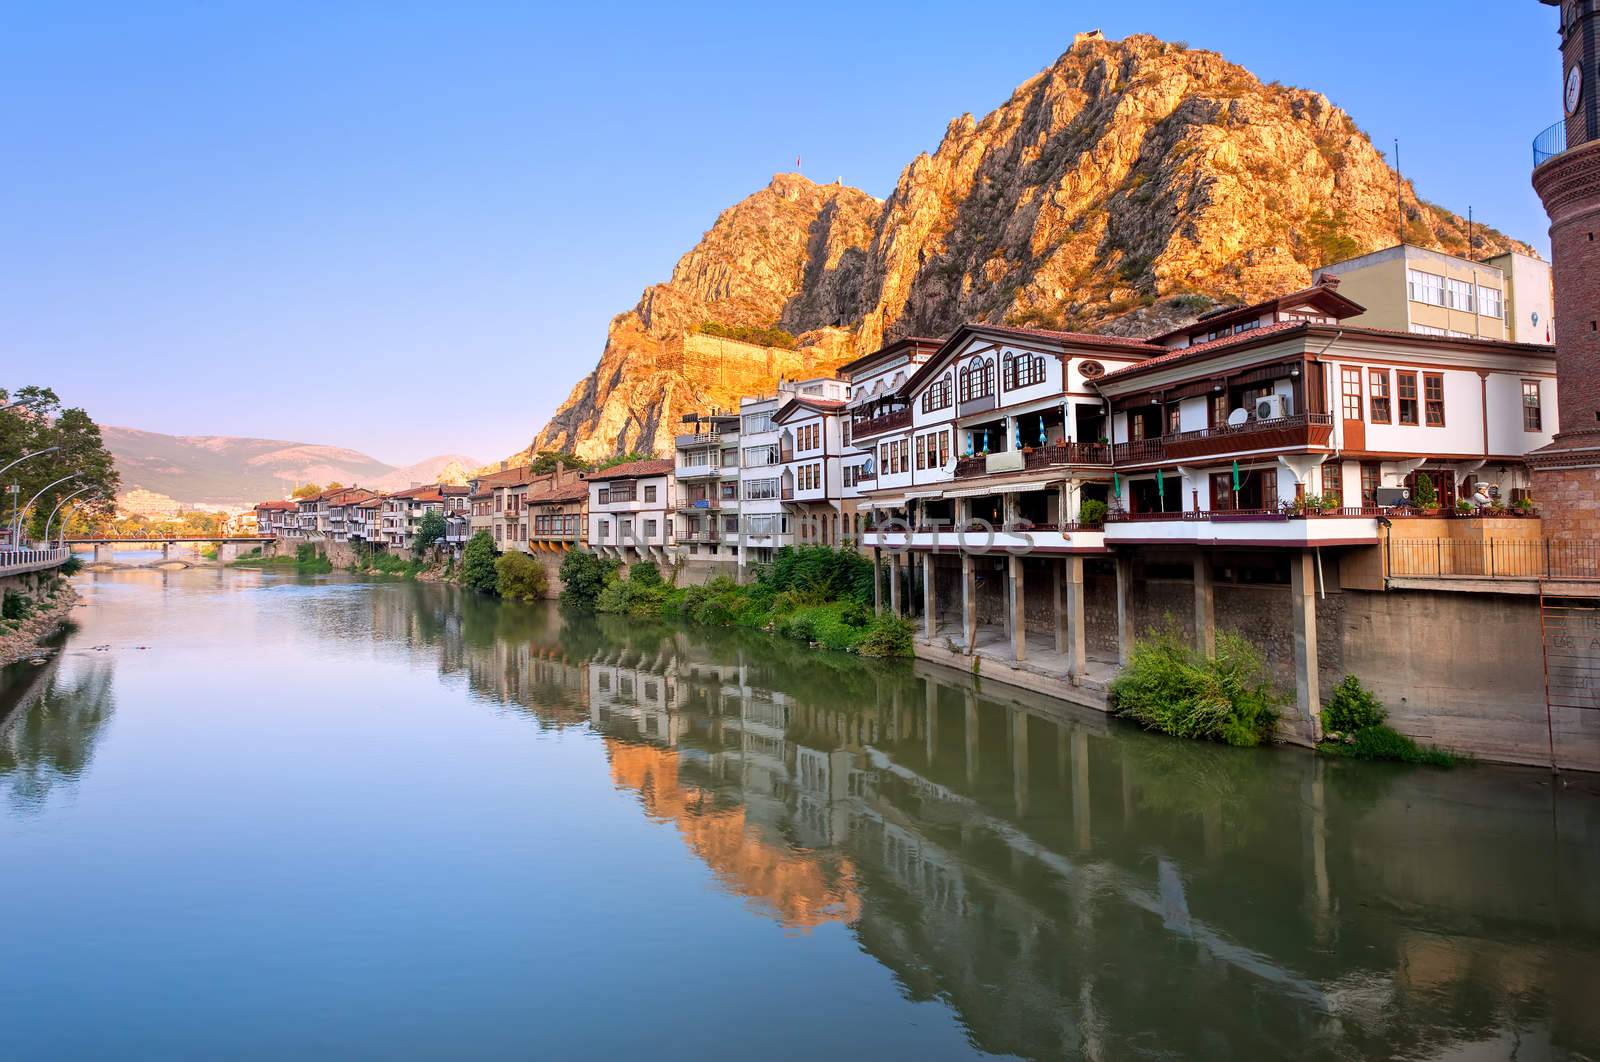 Traditional ottoman half timbered houses in Amasya, Turkey by GlobePhotos